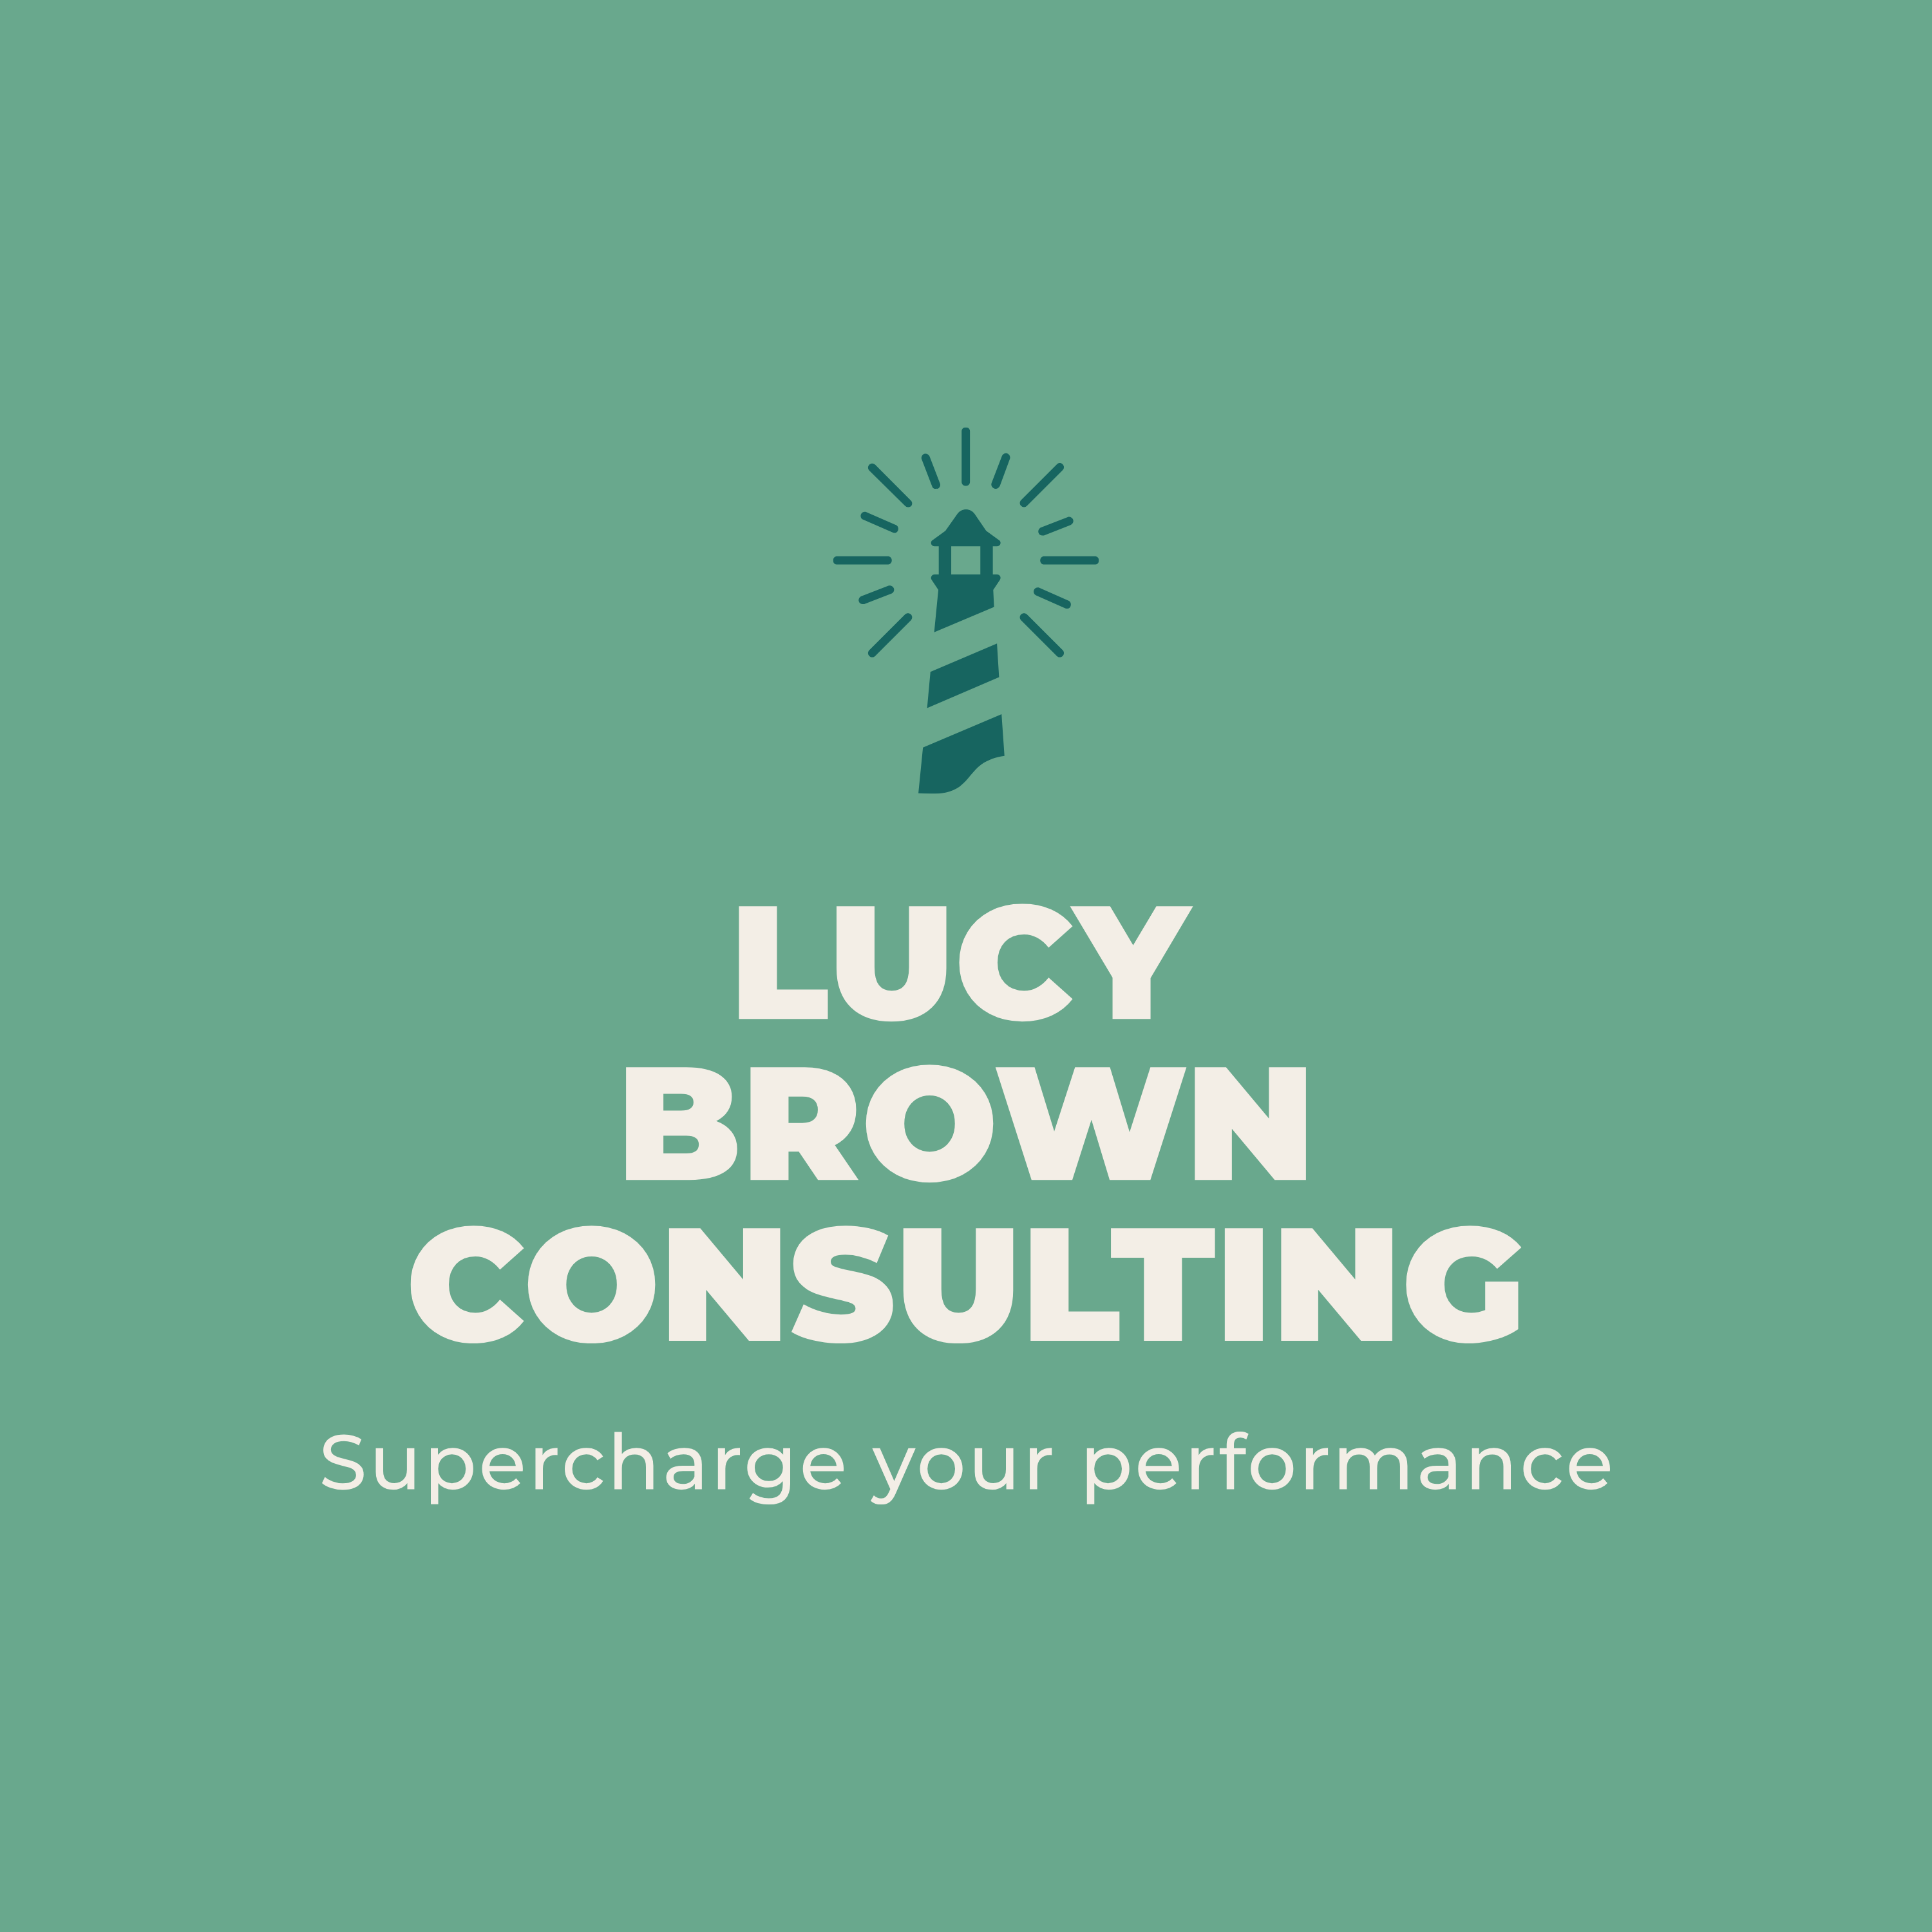 Lucy Brown Consulting